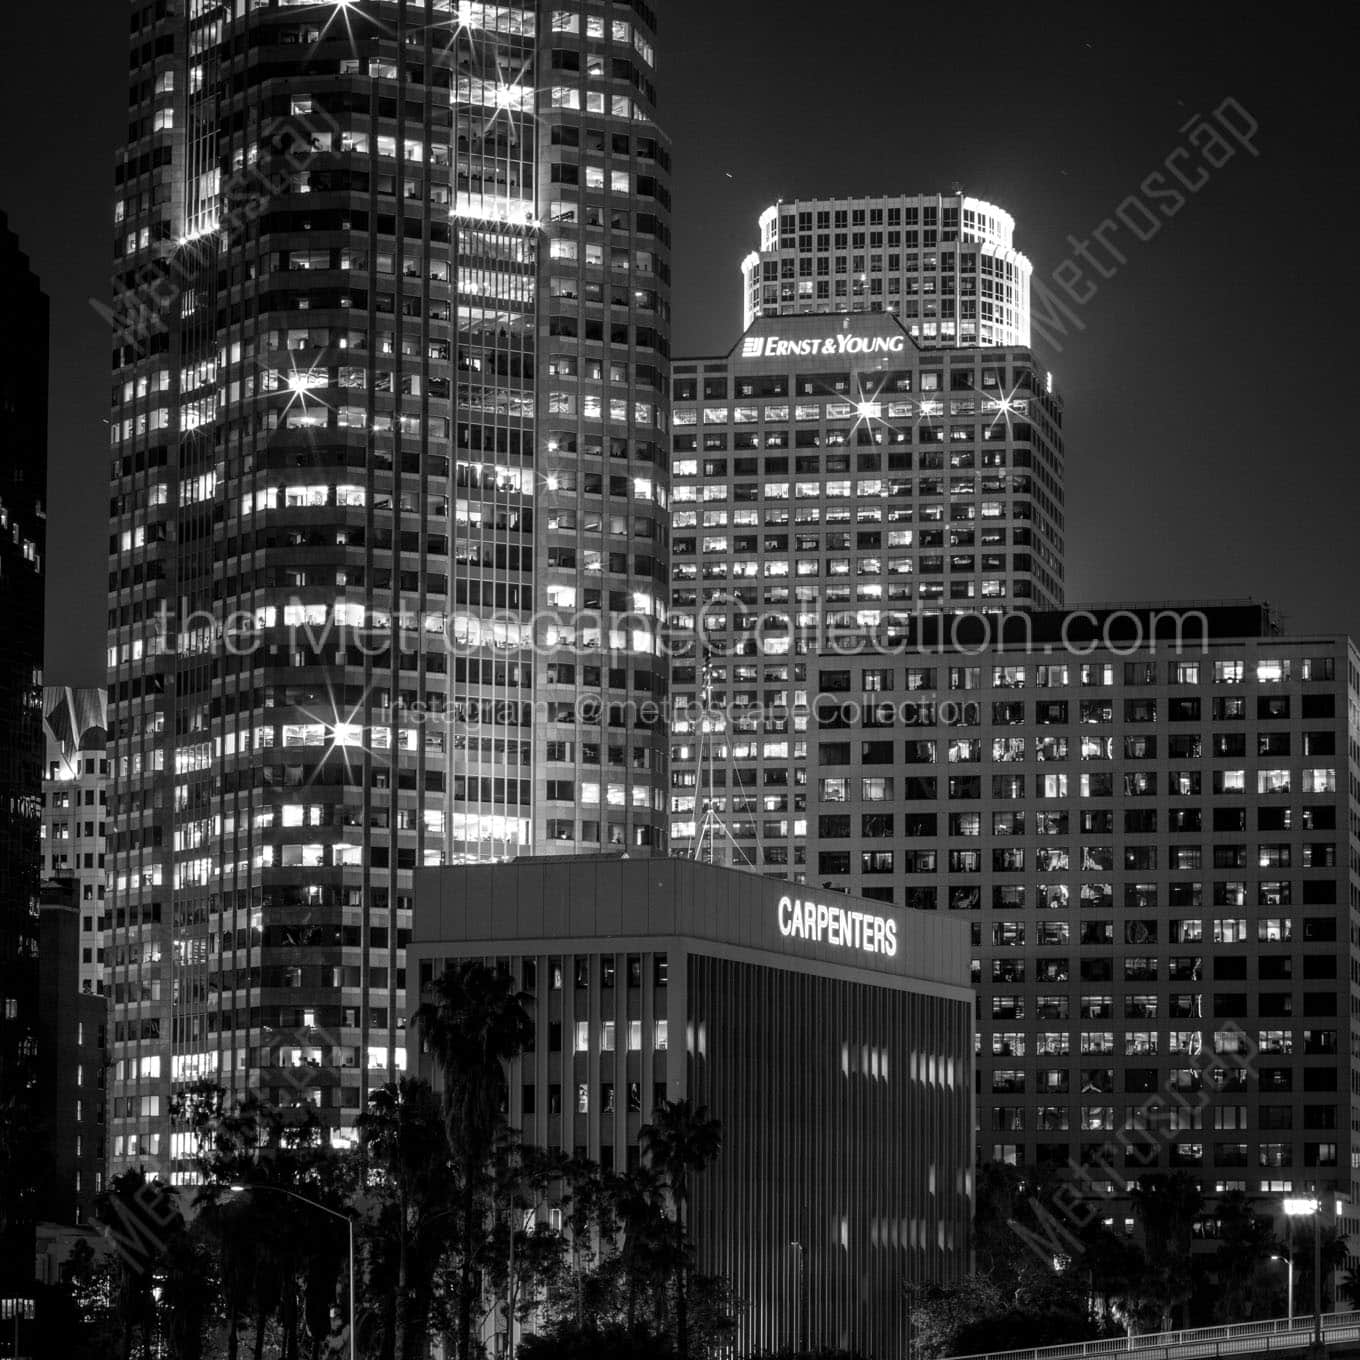 ernst young building downtown los angeles at night Black & White Office Art